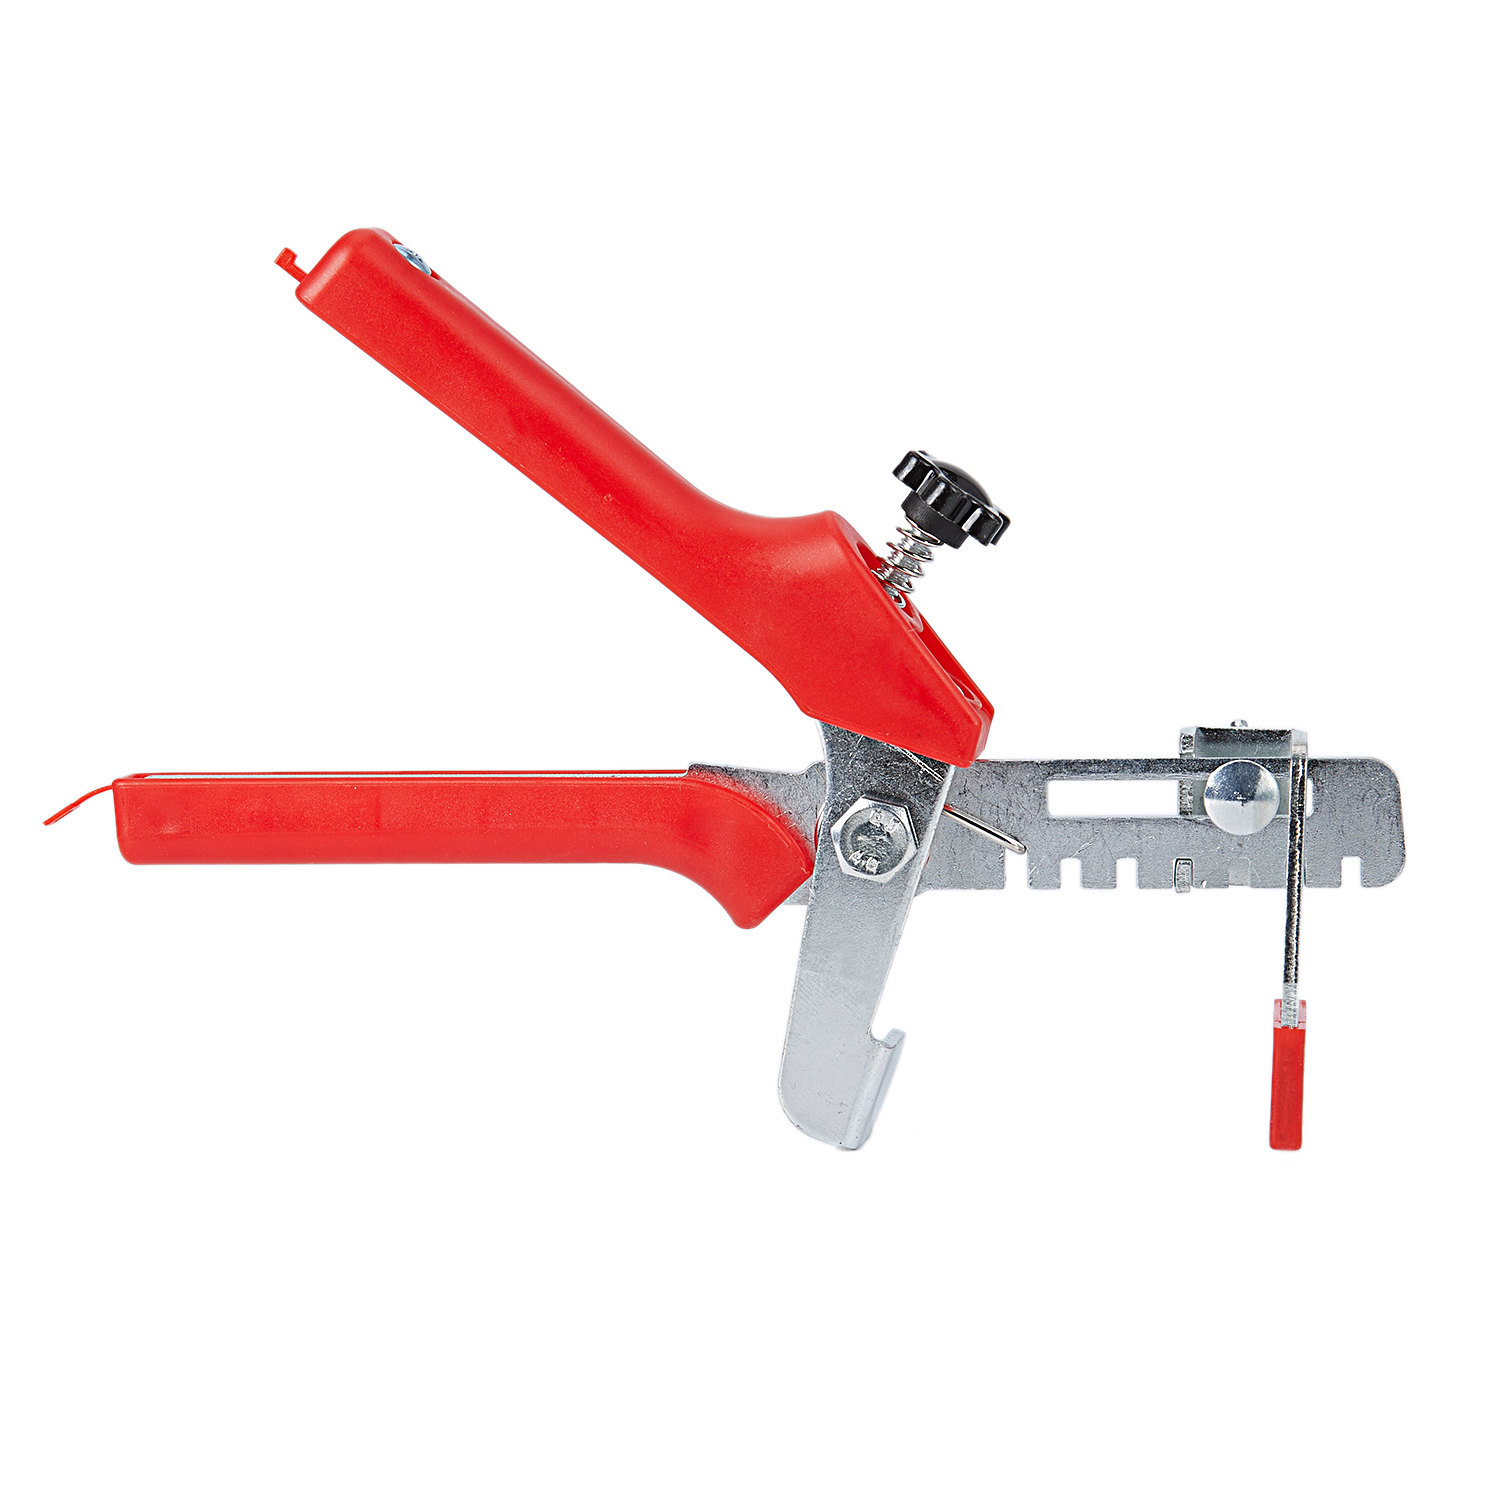 CNIM Hot Accurate Tile Leveling Pliers Tiling Locator Tile Leveling System Ceramic Tiles Installation measurement Tool Red